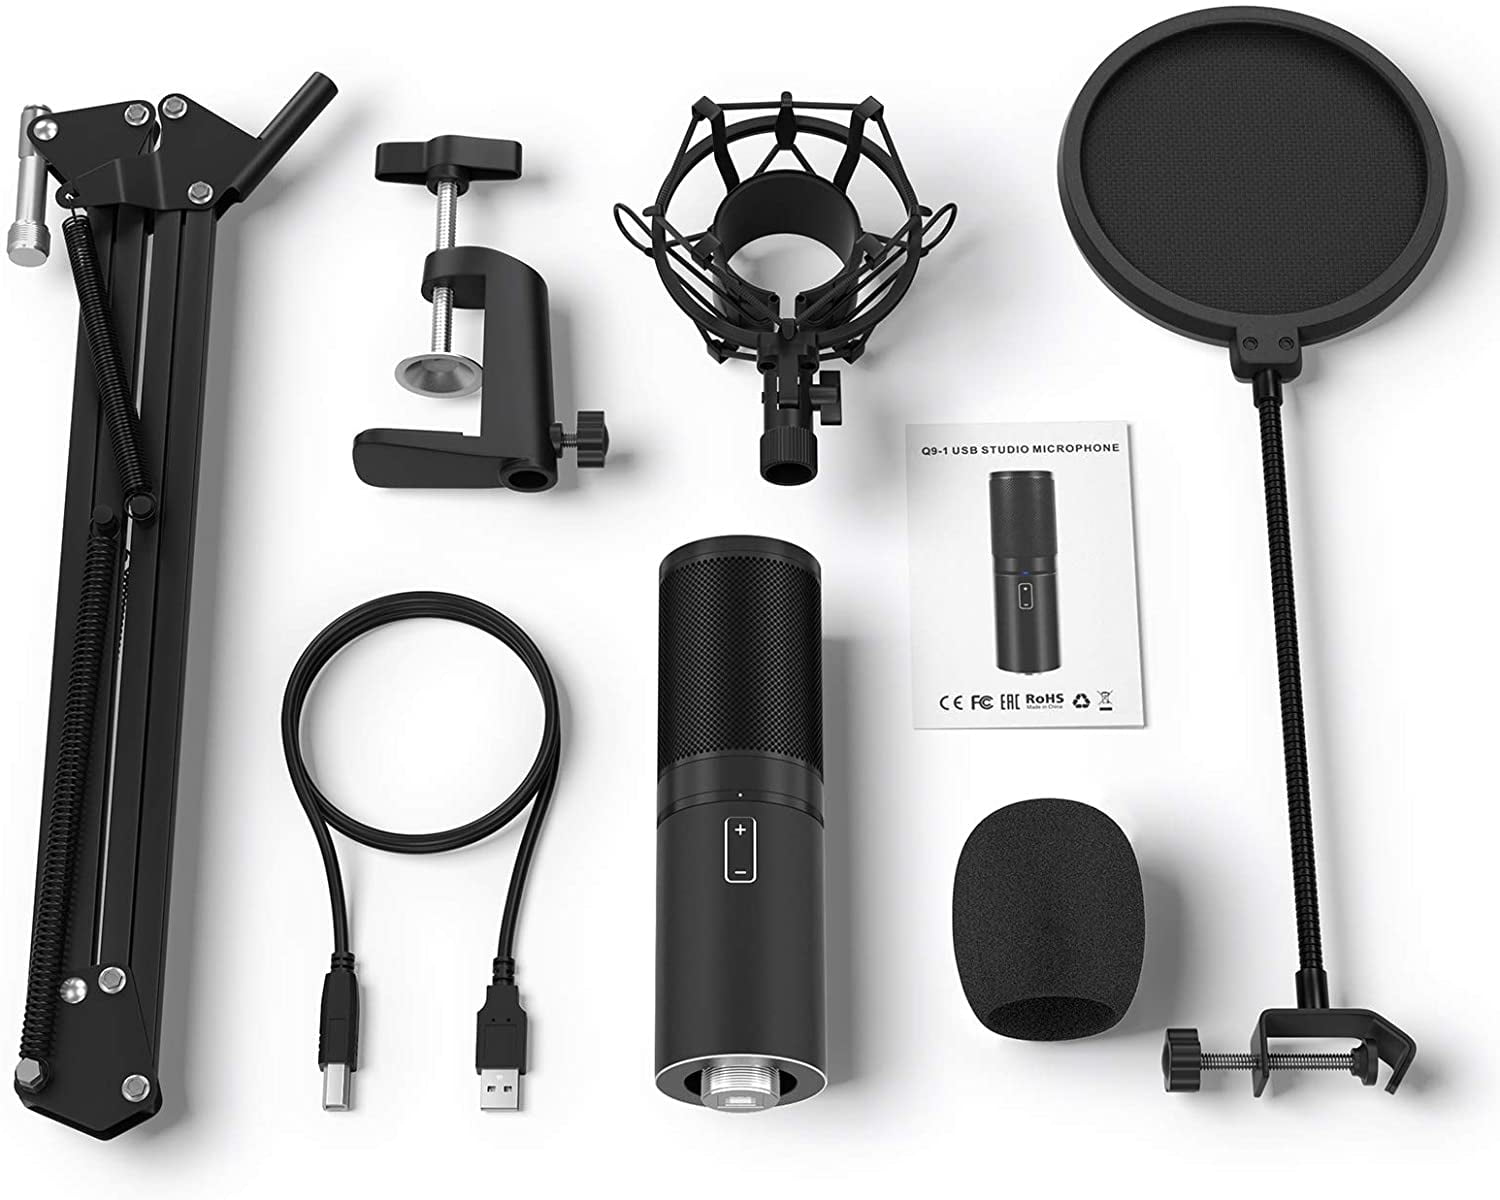 TONOR USB Microphone Kit, Streaming Podcast PC Condenser Computer 